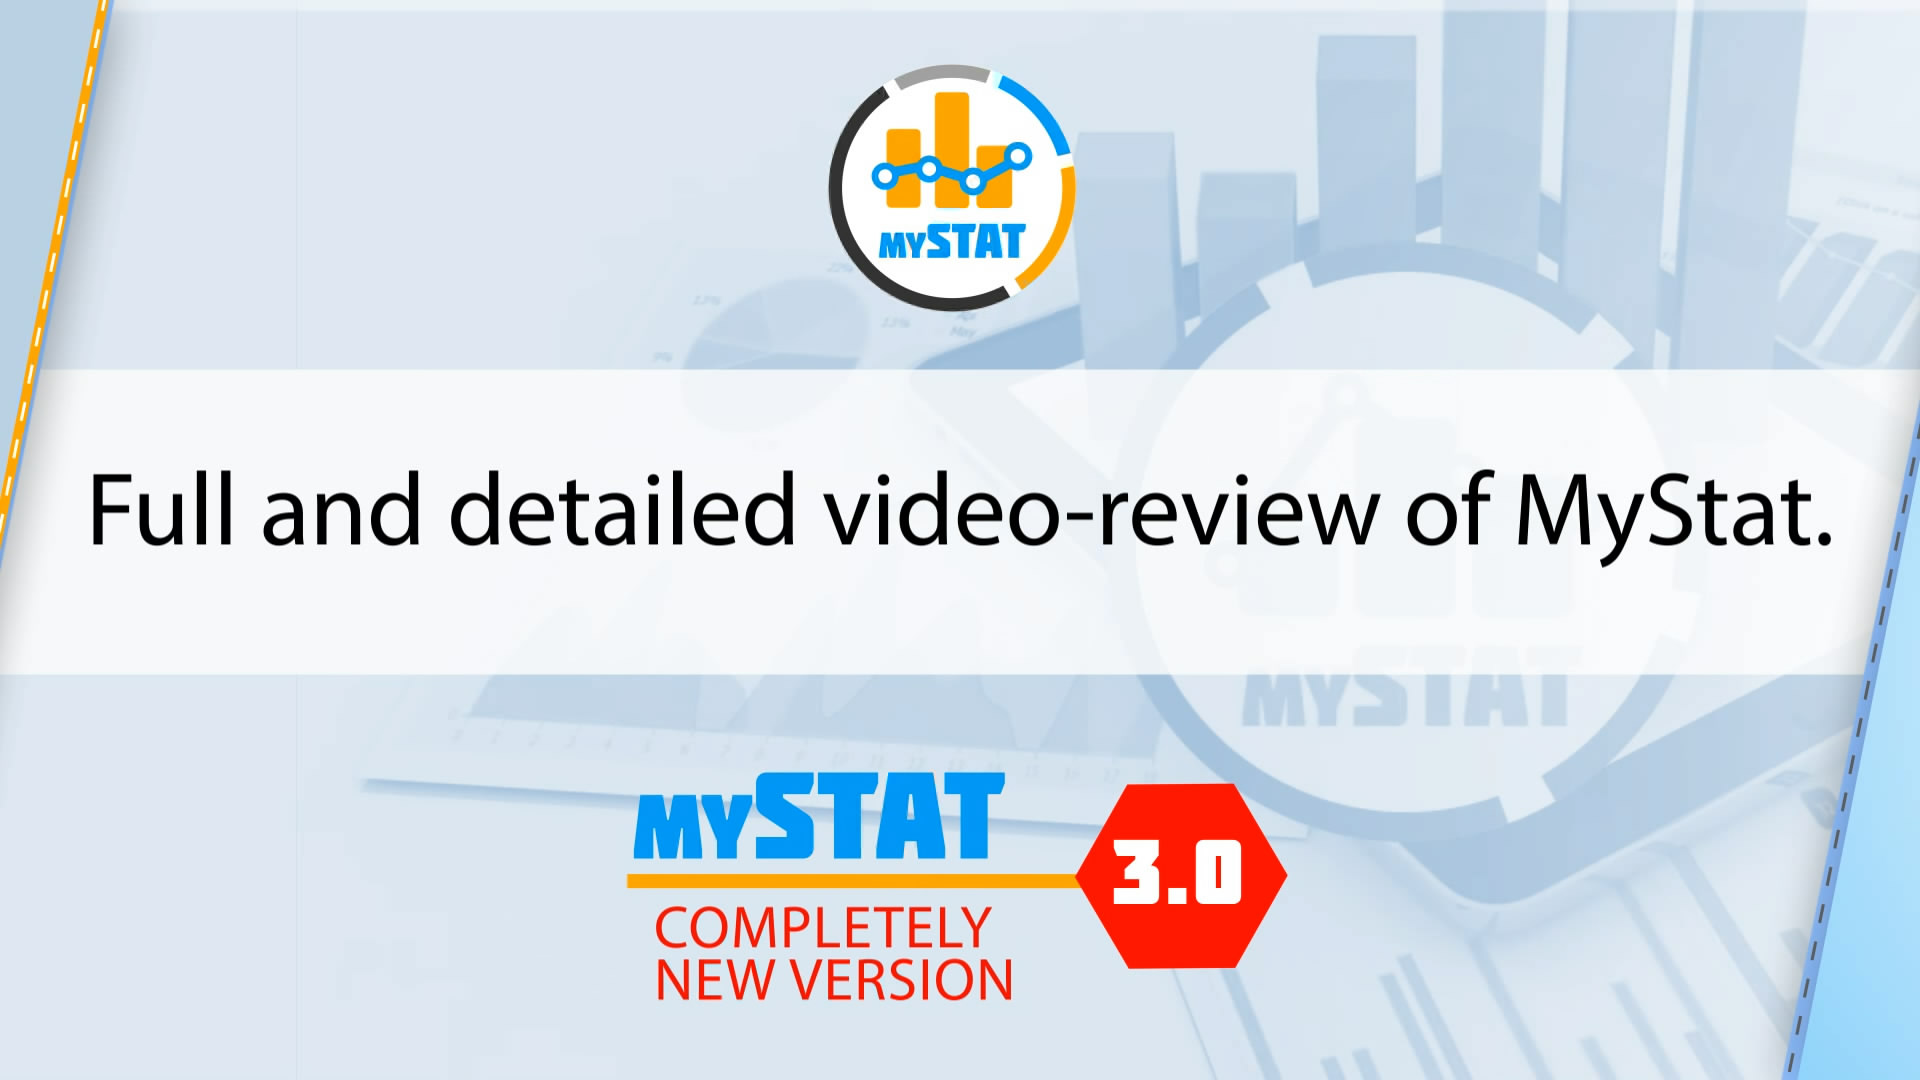 Full and detailed technical video-review of MyStat version 3.0.